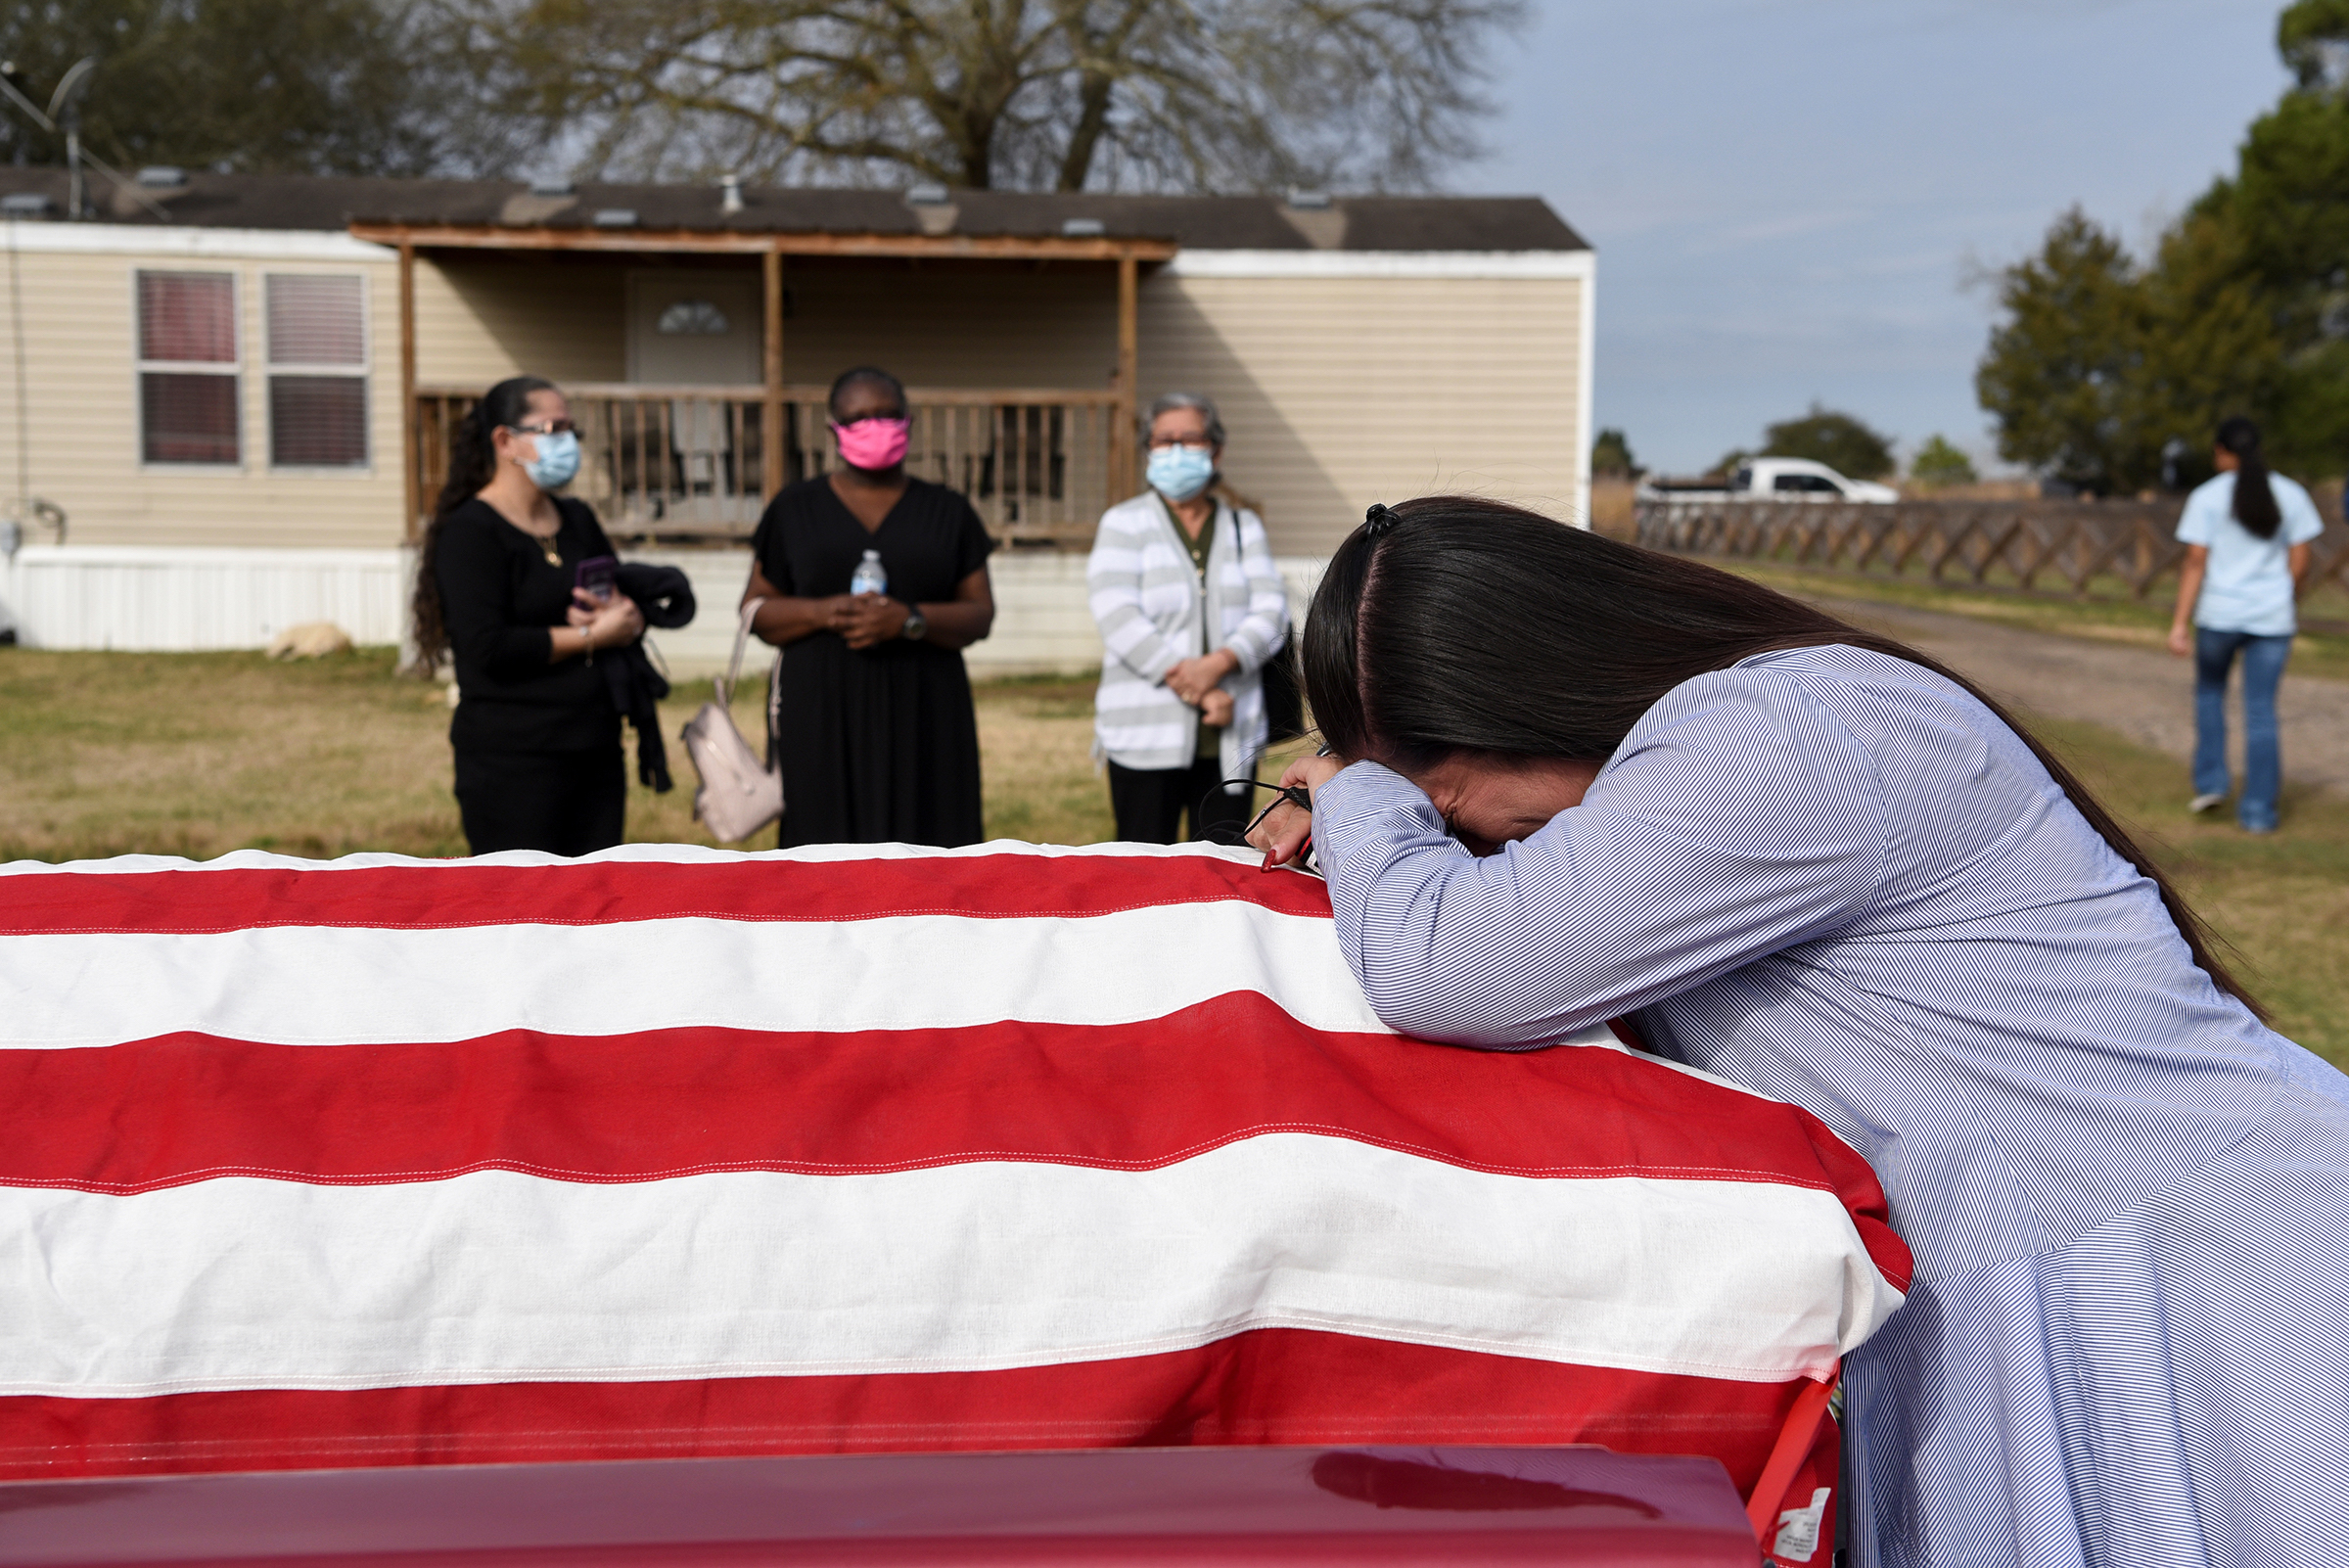 Lila Blanks reacts ahead of the funeral of her husband, Gregory Blanks, 50, who died from COVID-19 complications, in San Felipe, Texas, on Jan. 26. "We need to all do what we need to do to get over it," she said of the pandemic. "So it'll be over and we don't keep burying our husbands, our children, our mothers, our fathers."